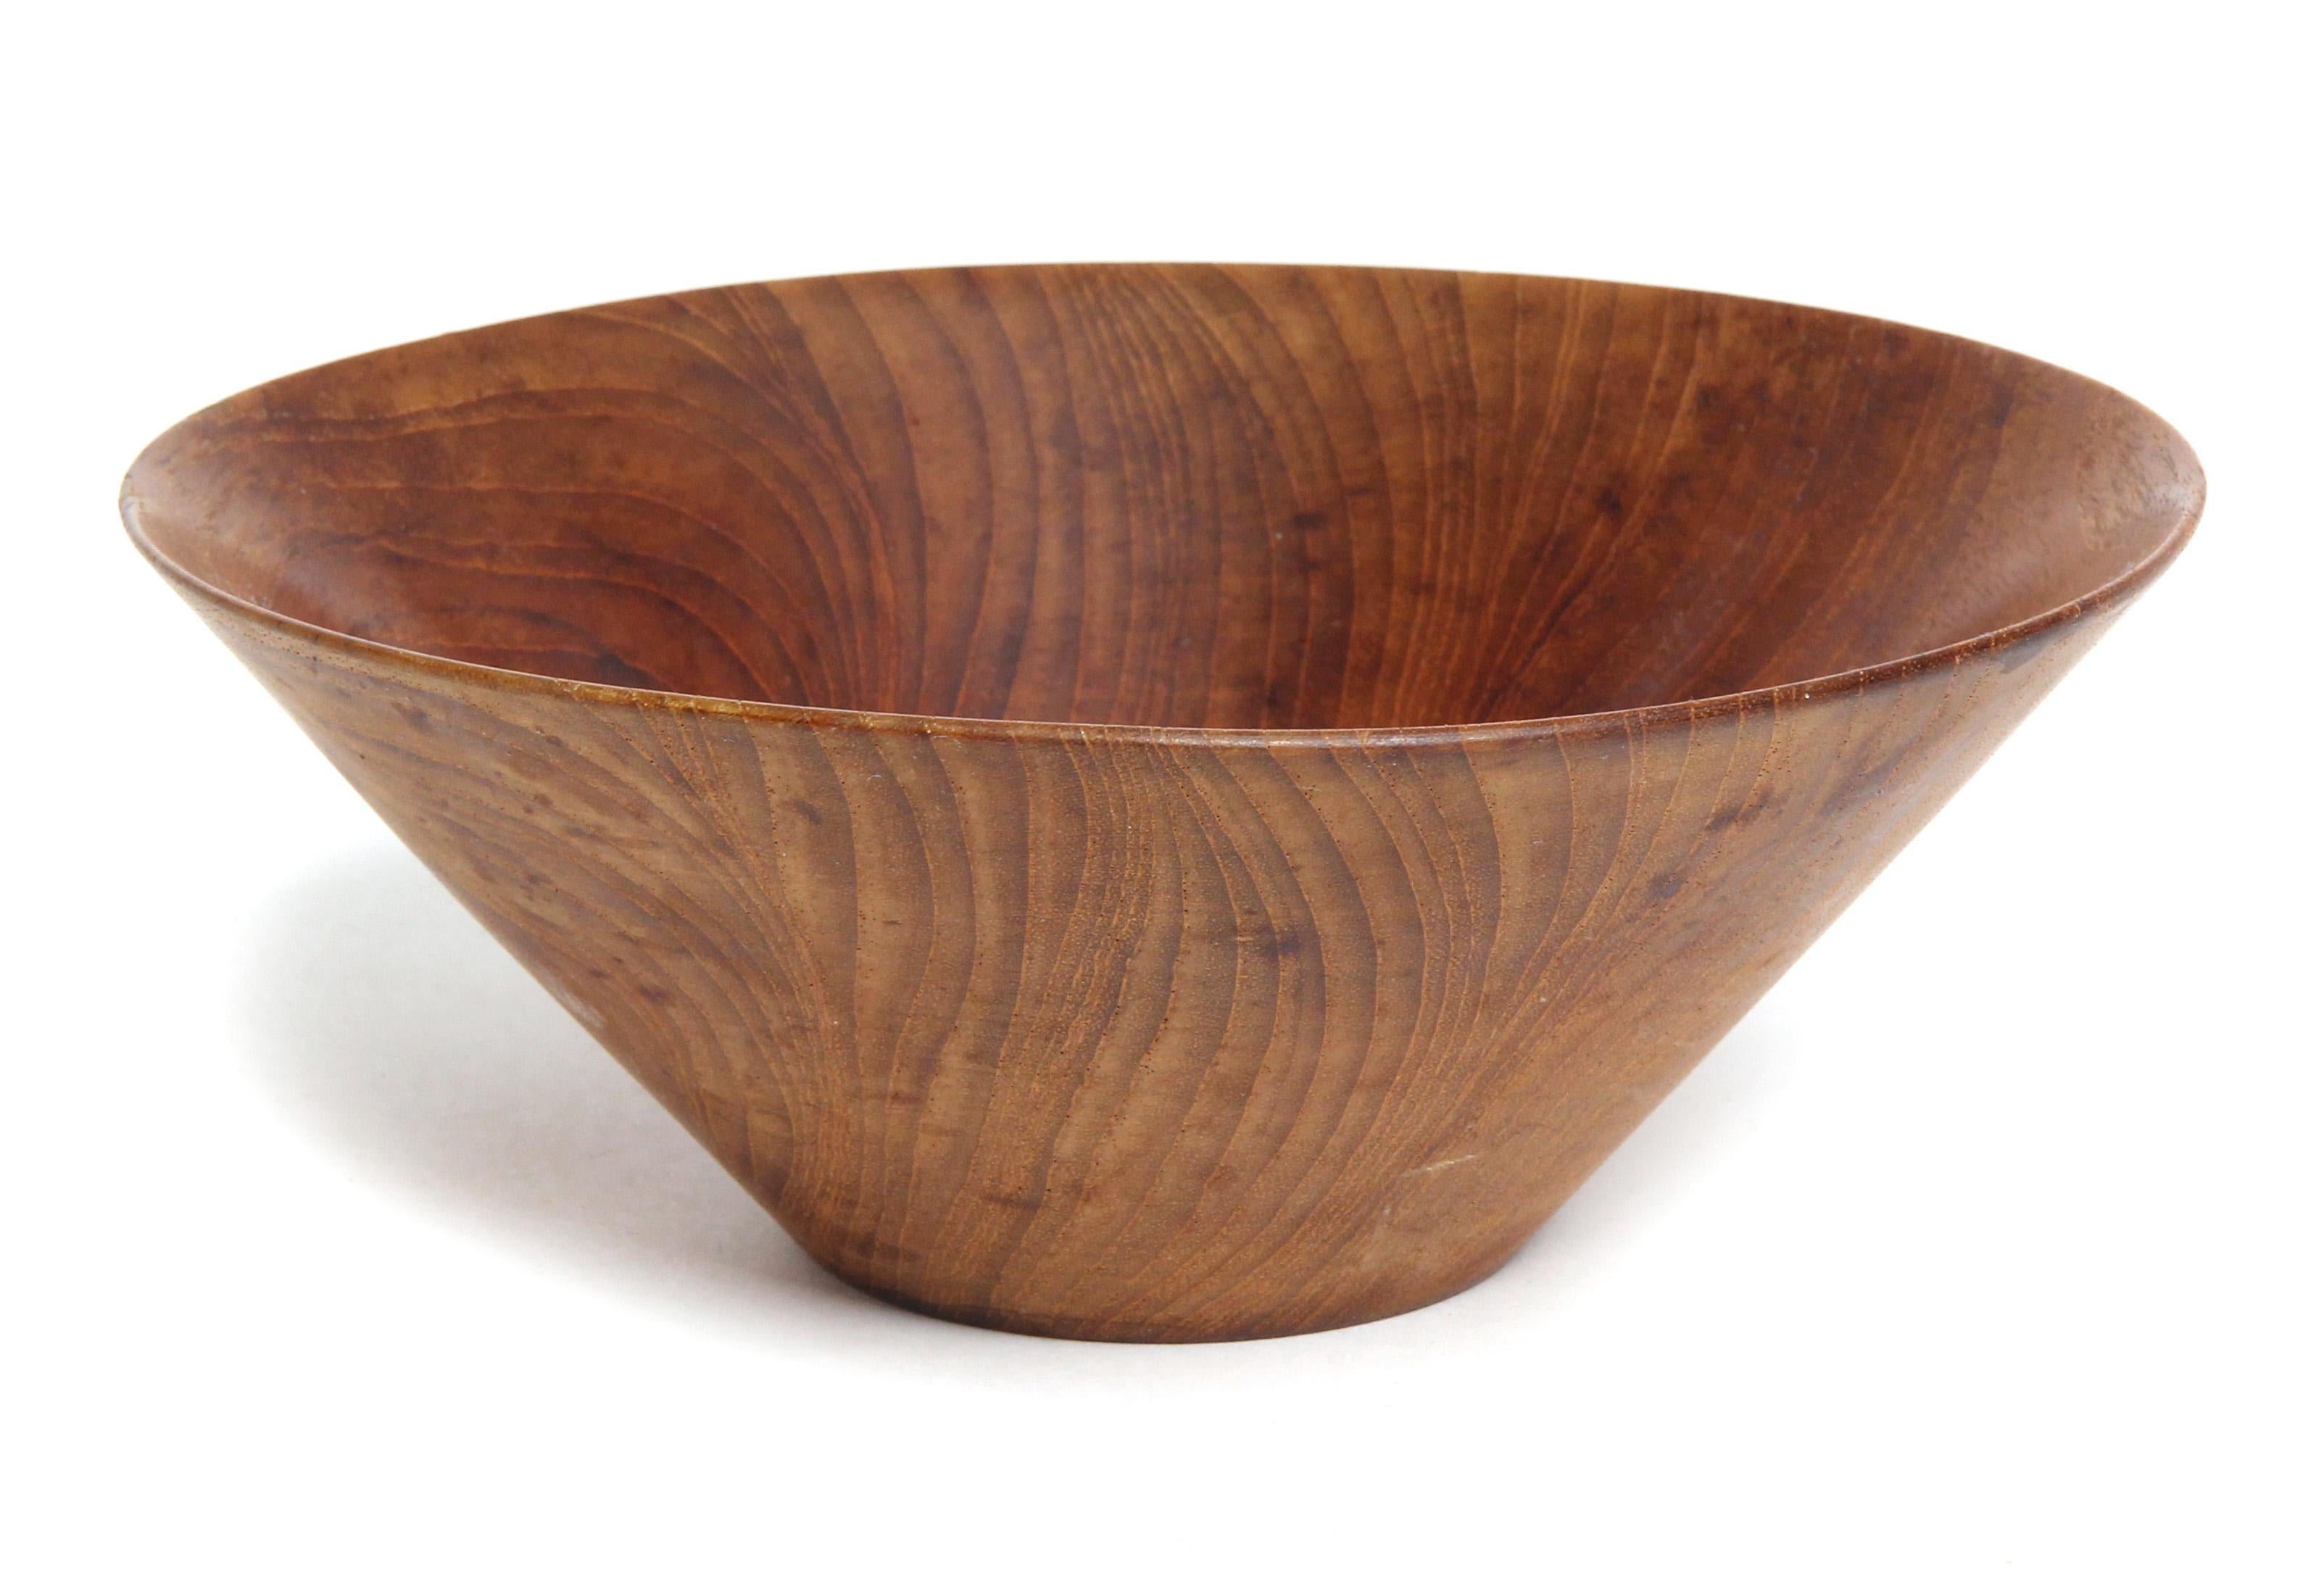 A thin walled lathe turned active grained wood bowl having flaring conical form.